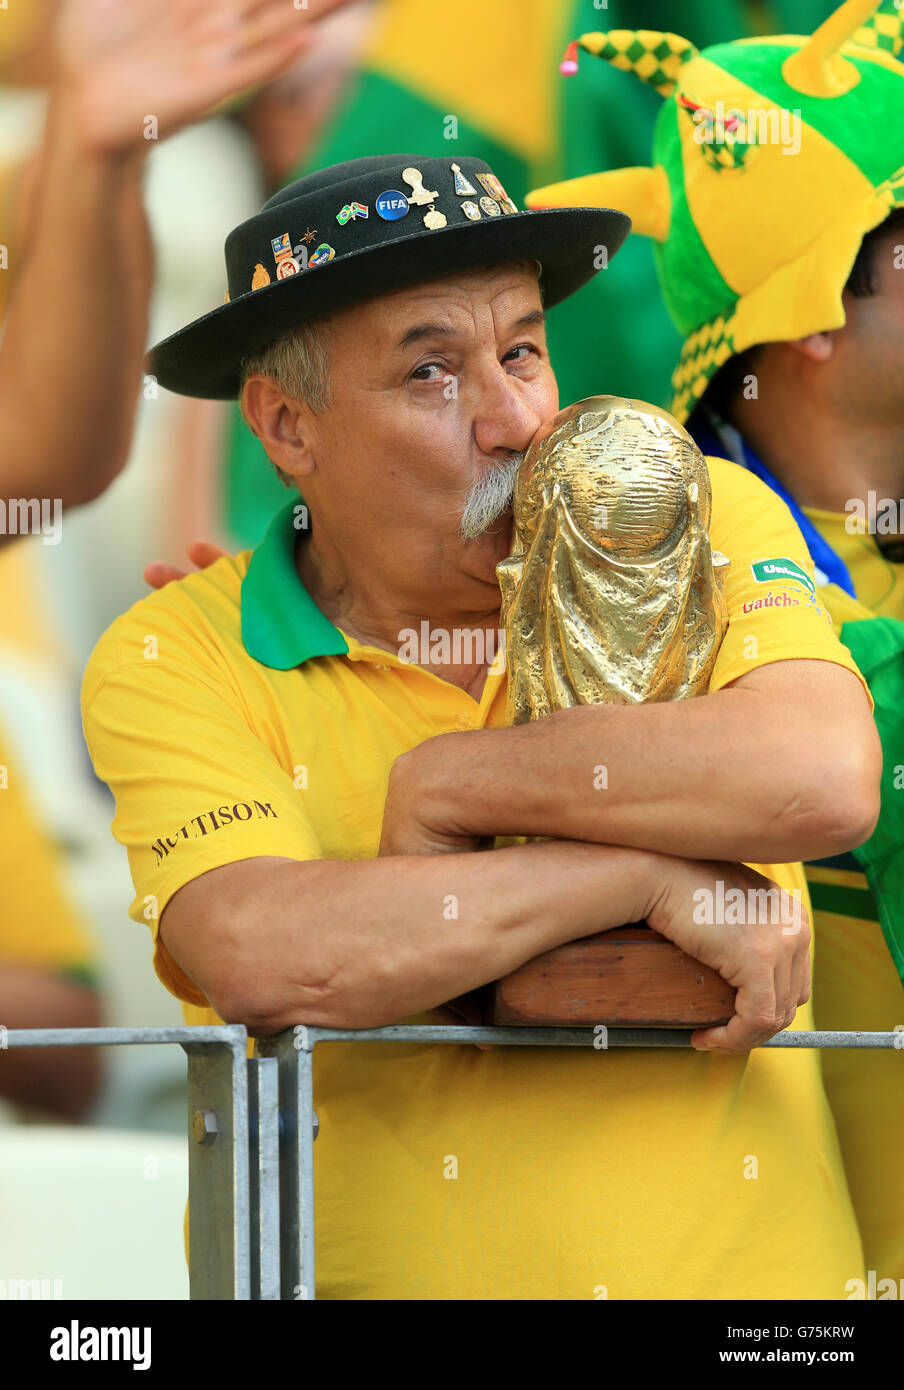 A Brazil fan kisses a replica of the World Cup trophy in the stands before the quarter final match at the Estadio Castelao, Fortaleza. Stock Photo